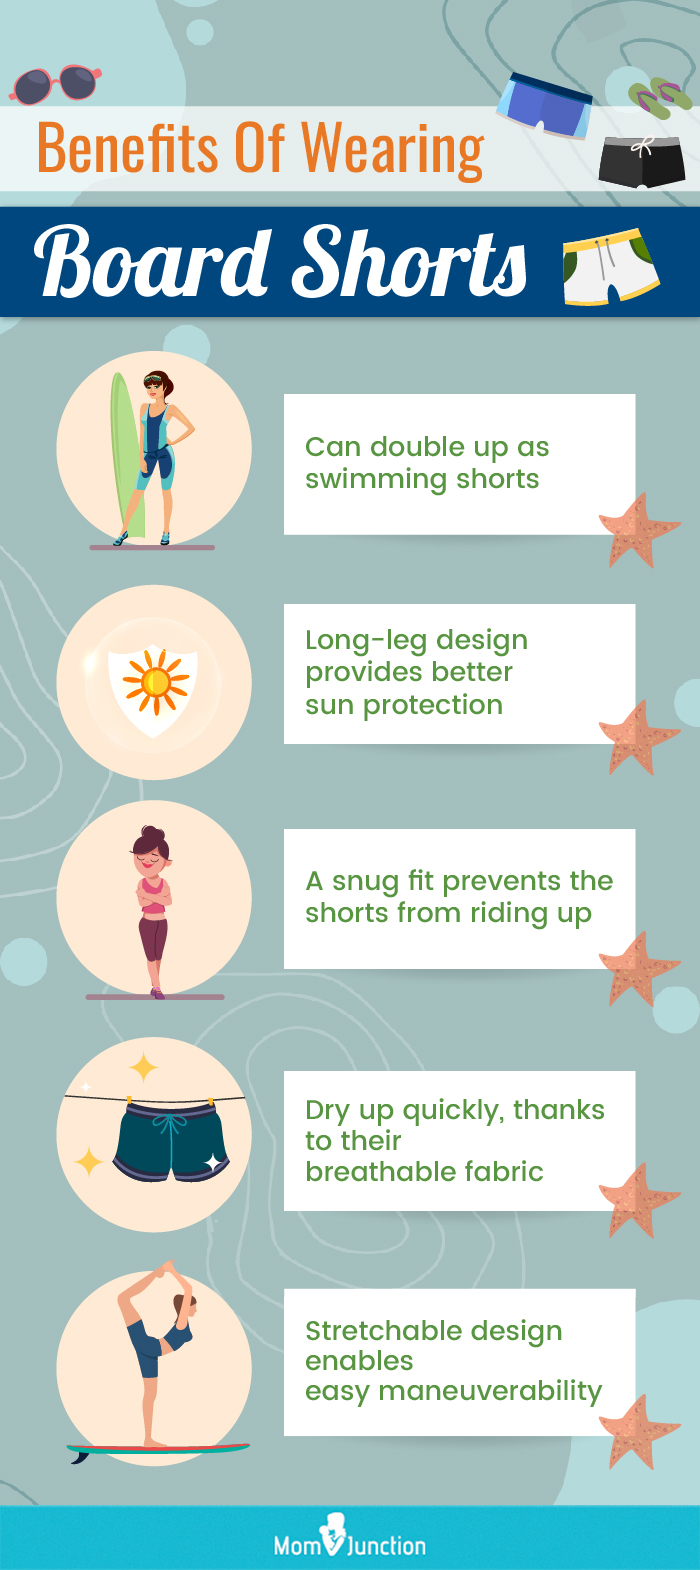 Benefits Of Wearing Board Shorts (infographic)